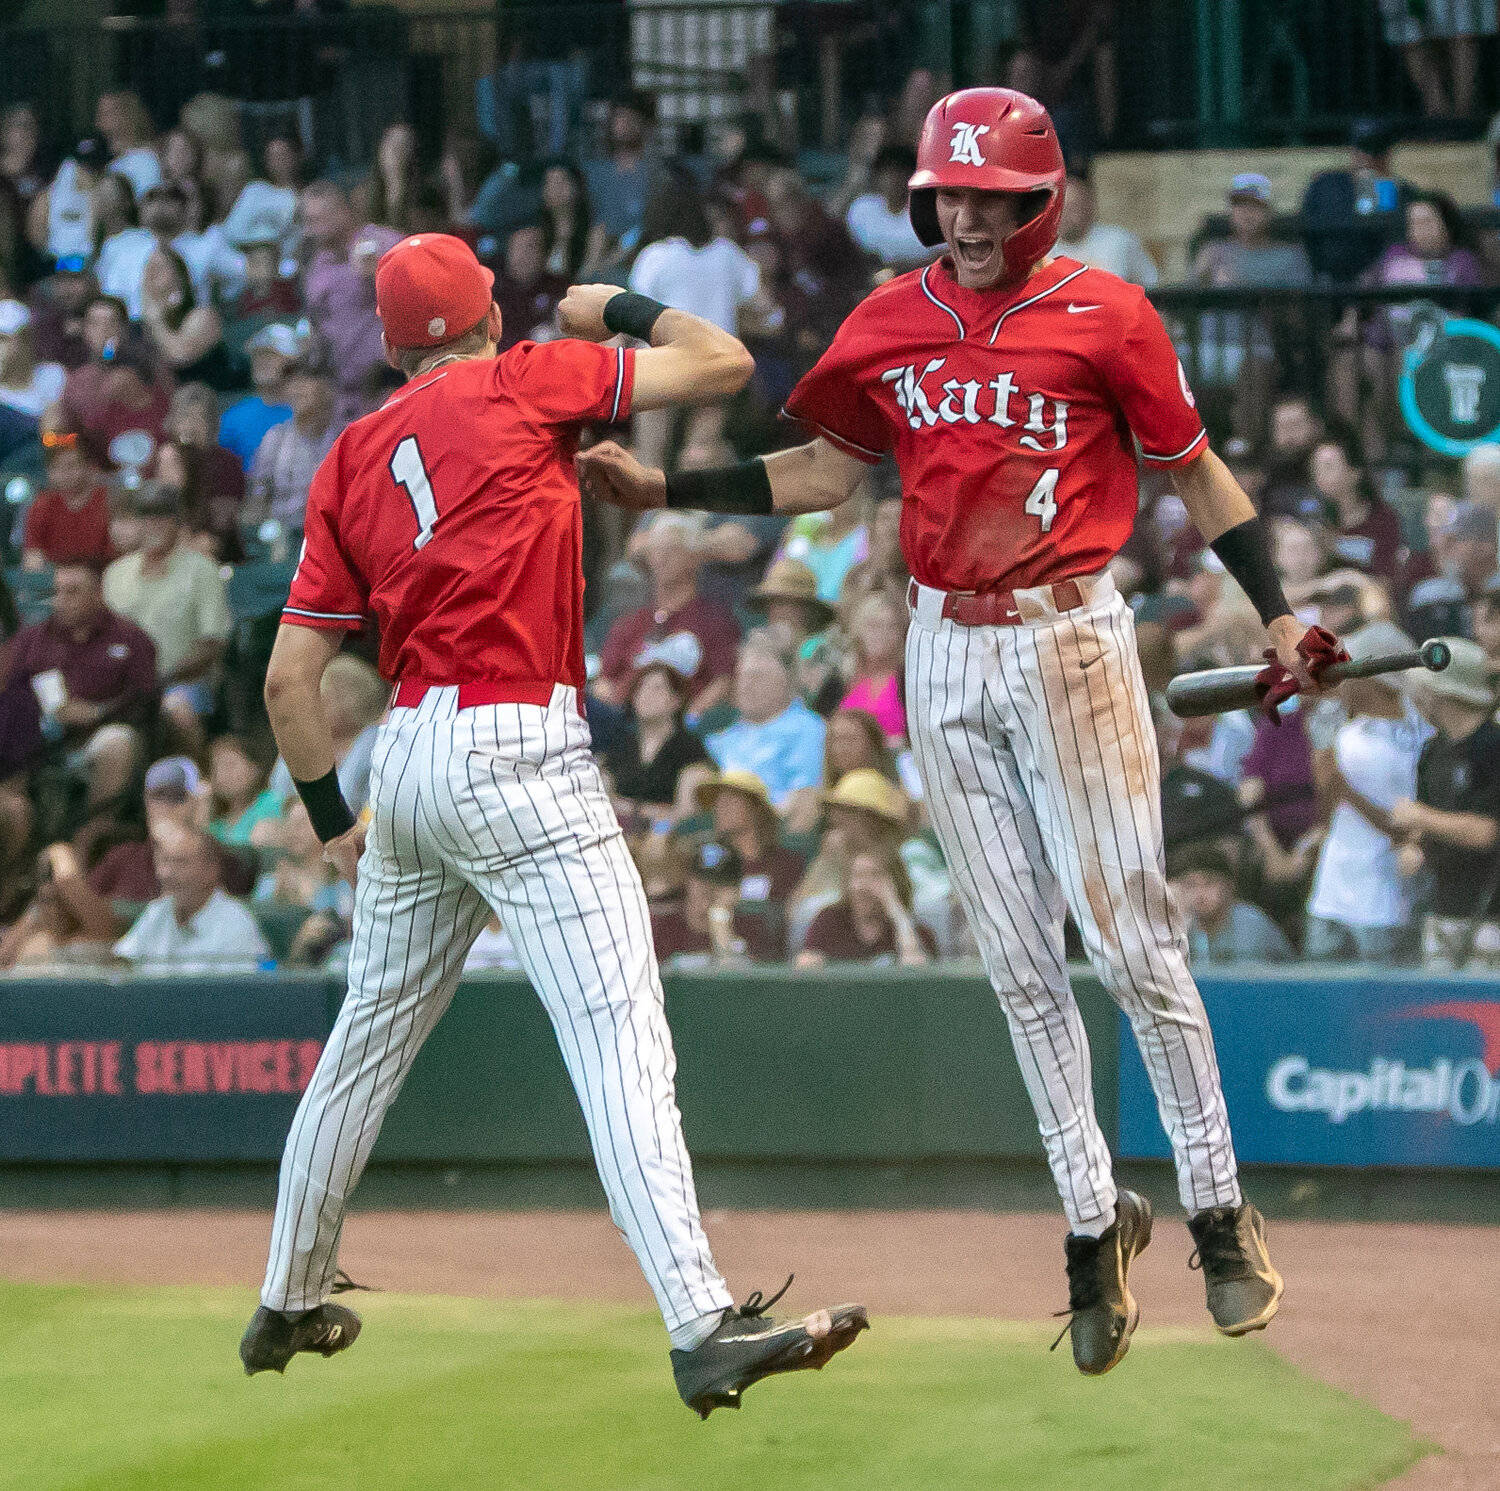 Andrew Horner celebrates after scoring a run during Friday's Regional Final between Katy and Pearland at Constellation Field in Sugar Land.